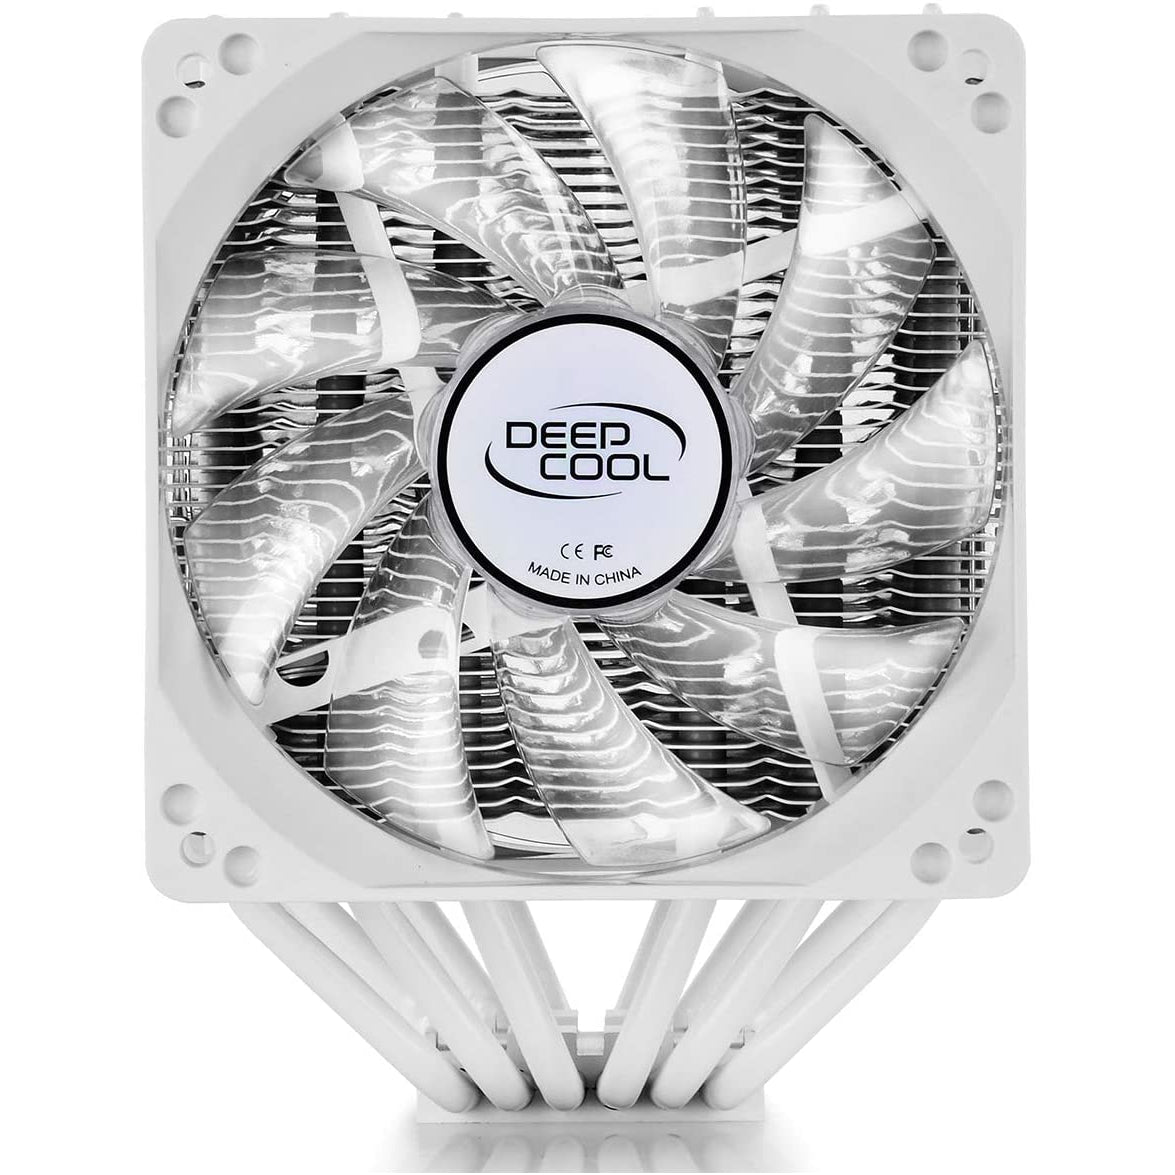 Deepcool Neptwin WH CPU Cooler 6 Heat pipes Twin-tower Heatsink Dual 120mm white LED Fans, AM4 Compatible